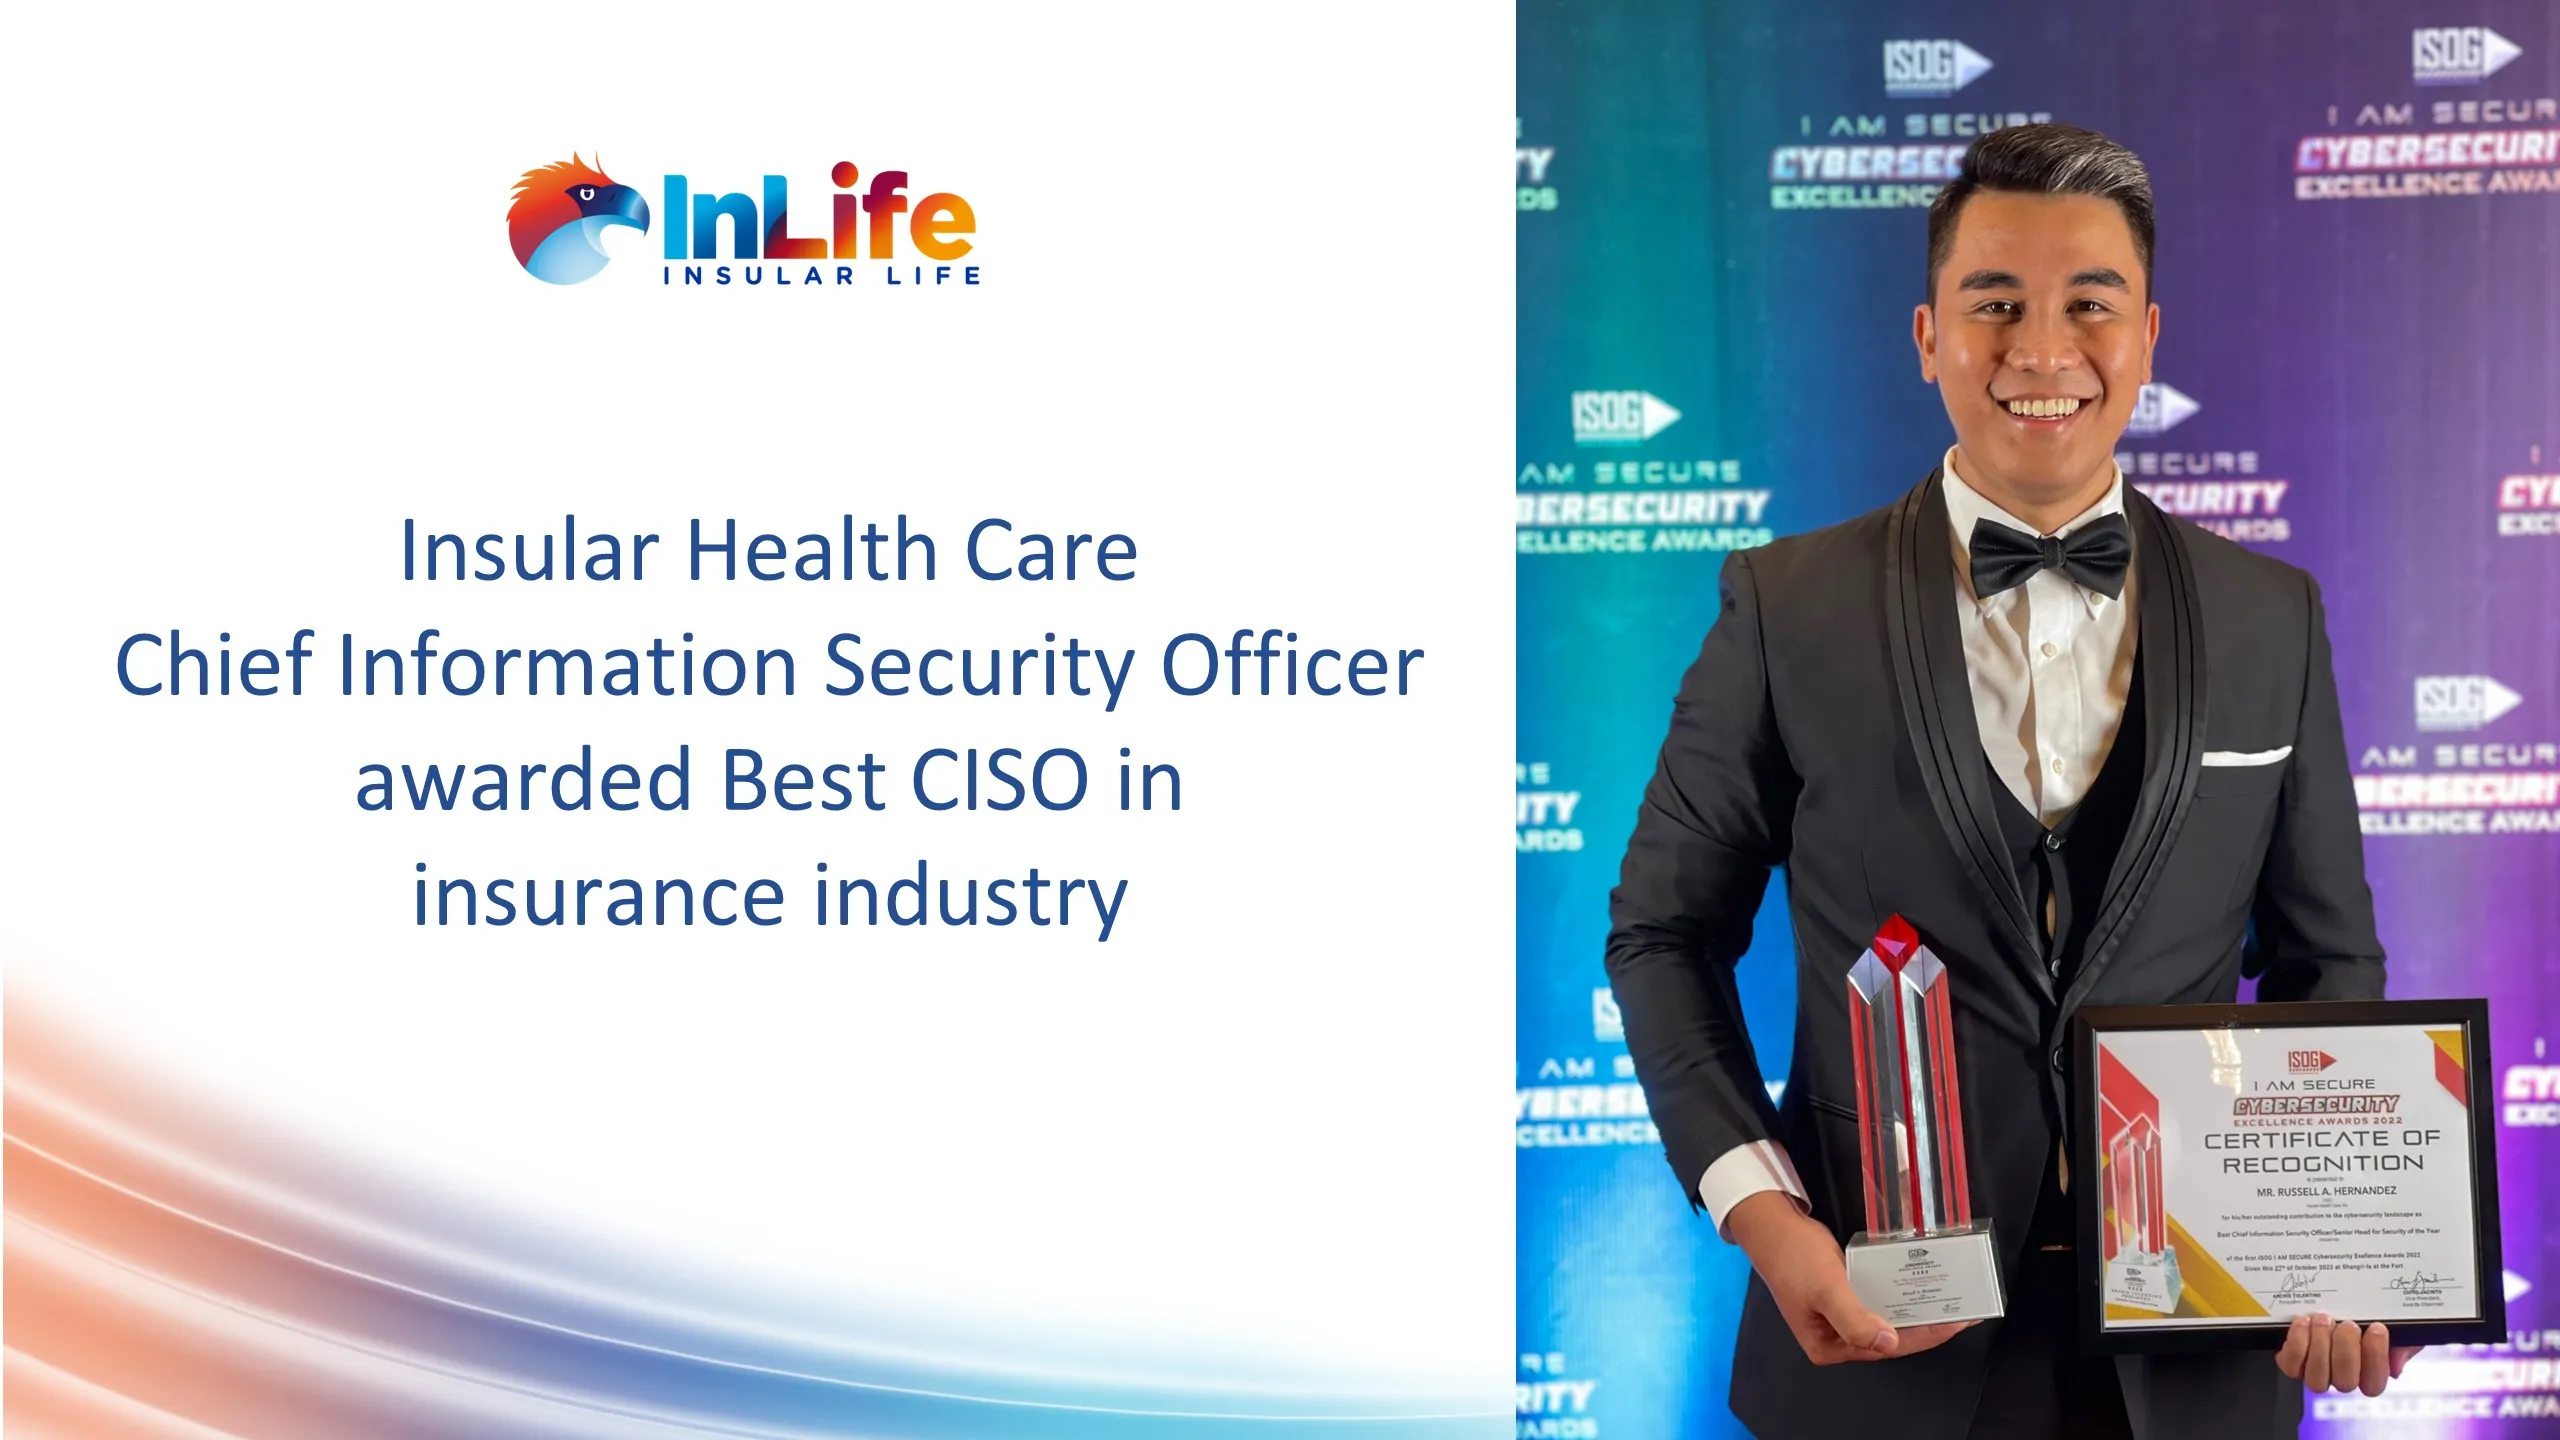 insular-health-care-chief-information-security-officer-awarded-best-ciso-in-insurance-industry